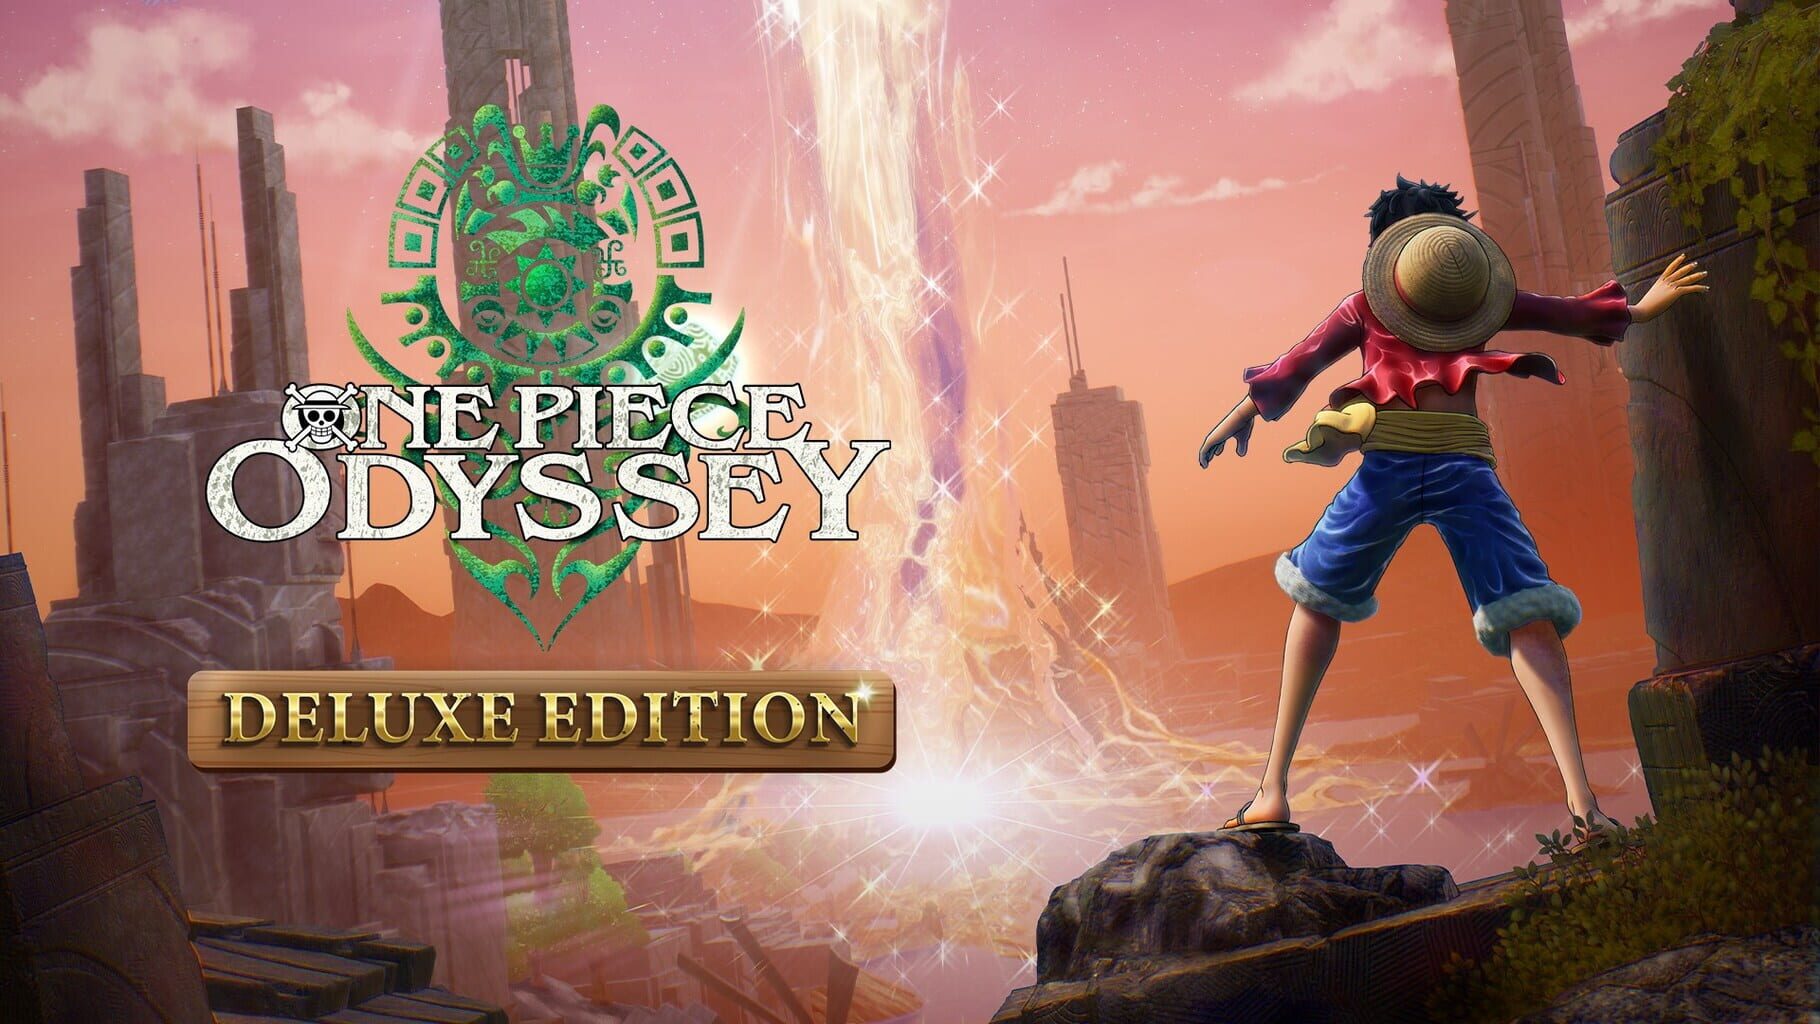 Artwork for One Piece Odyssey: Deluxe Edition